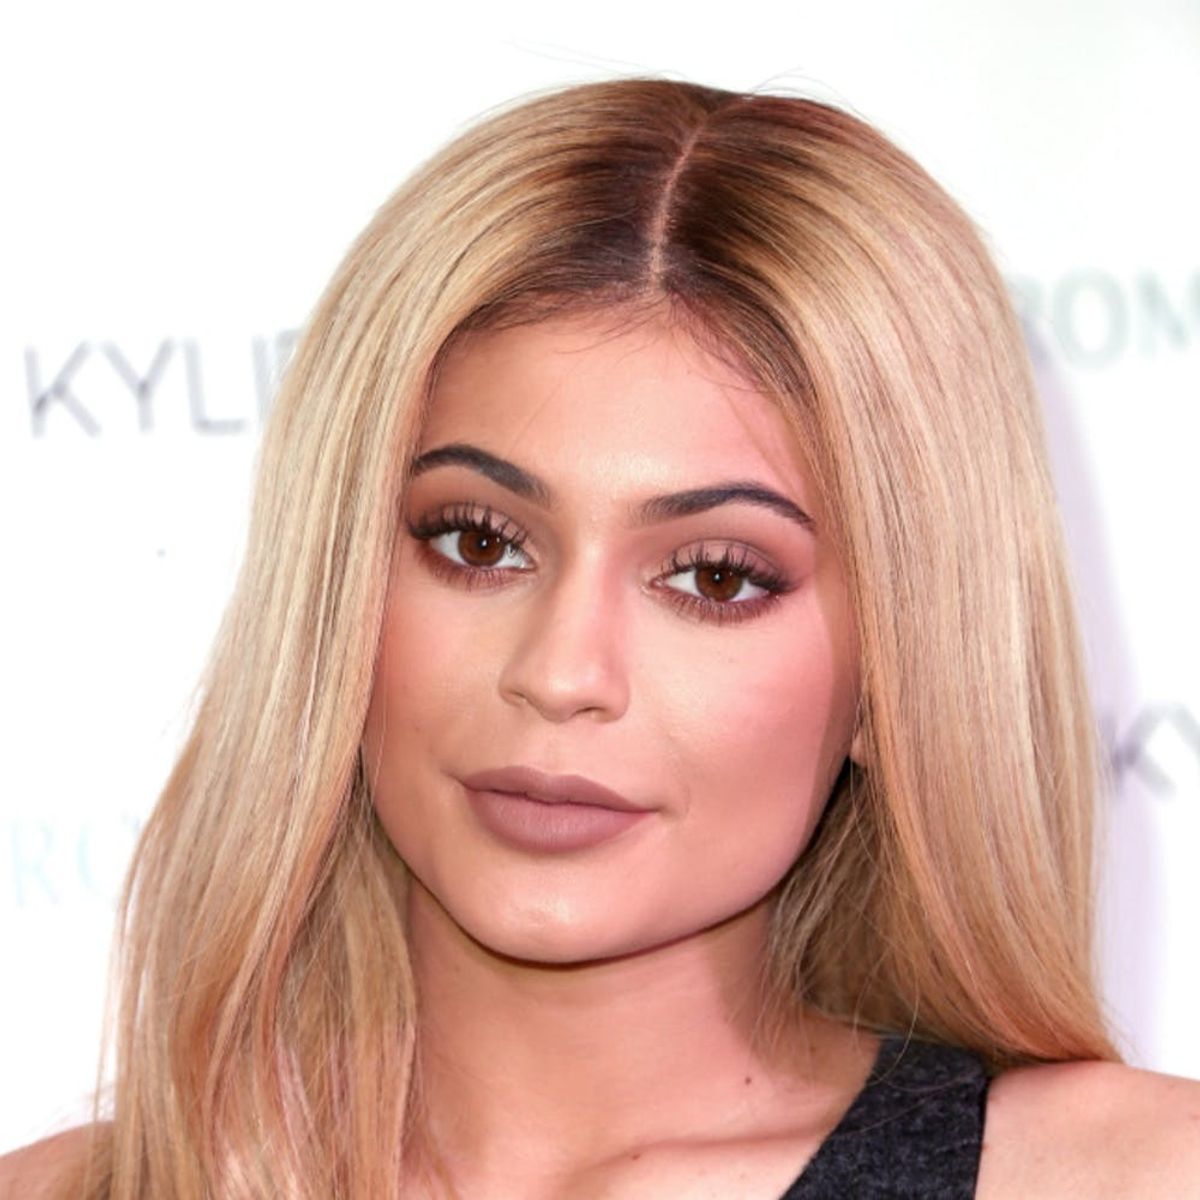 Kylie Jenner’s Newest Lip Kit Was Leaked and She Is NOT Happy About It